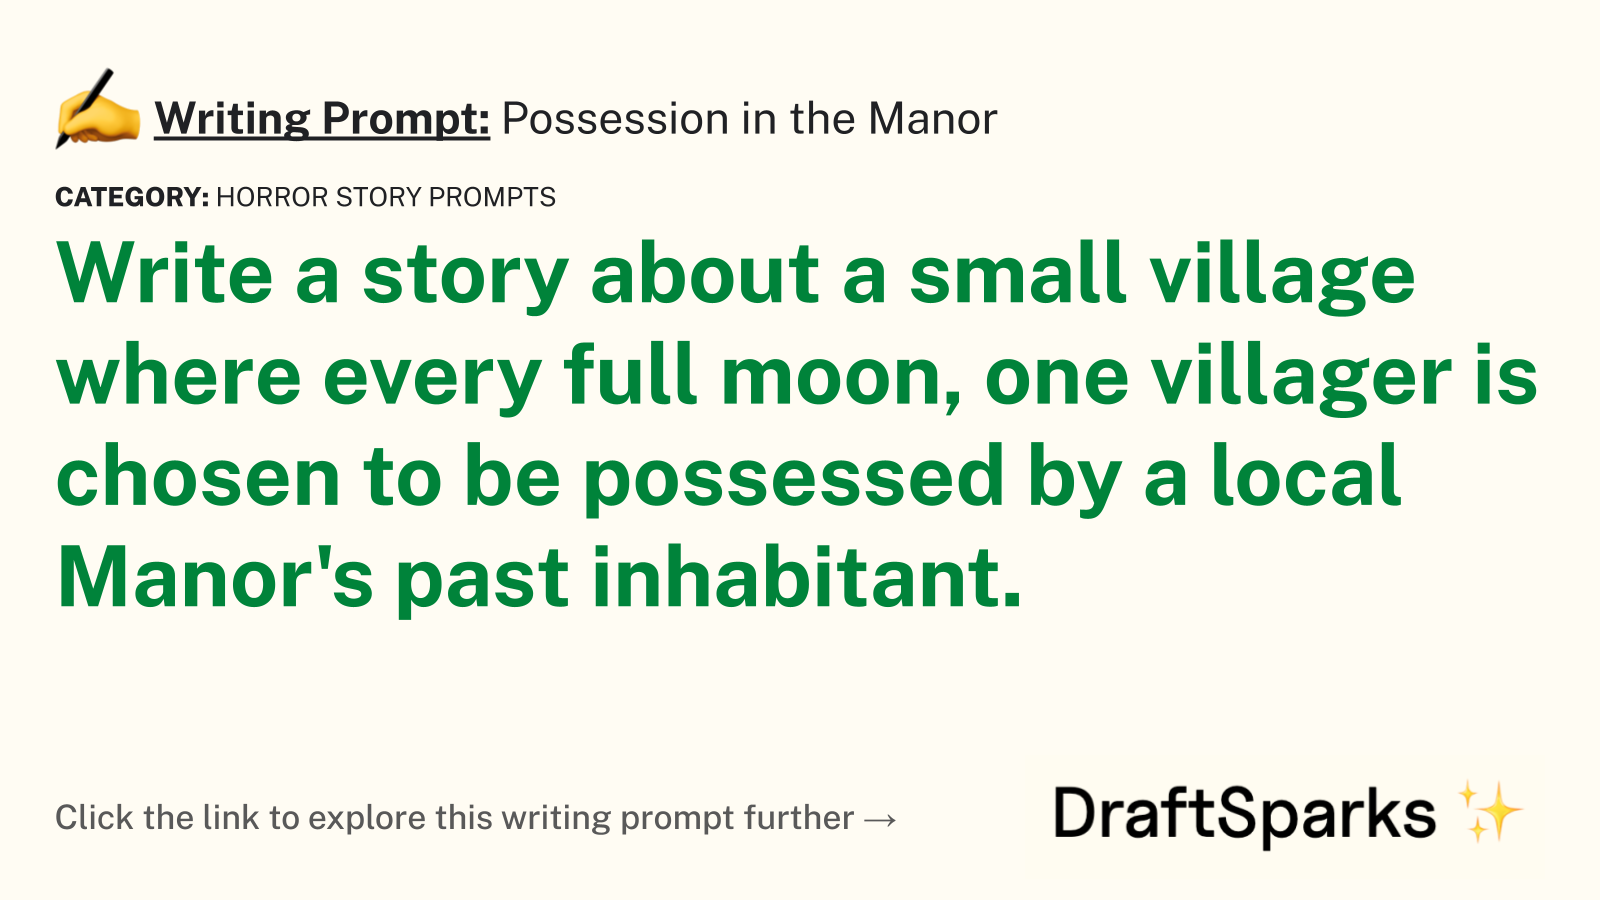 Possession in the Manor